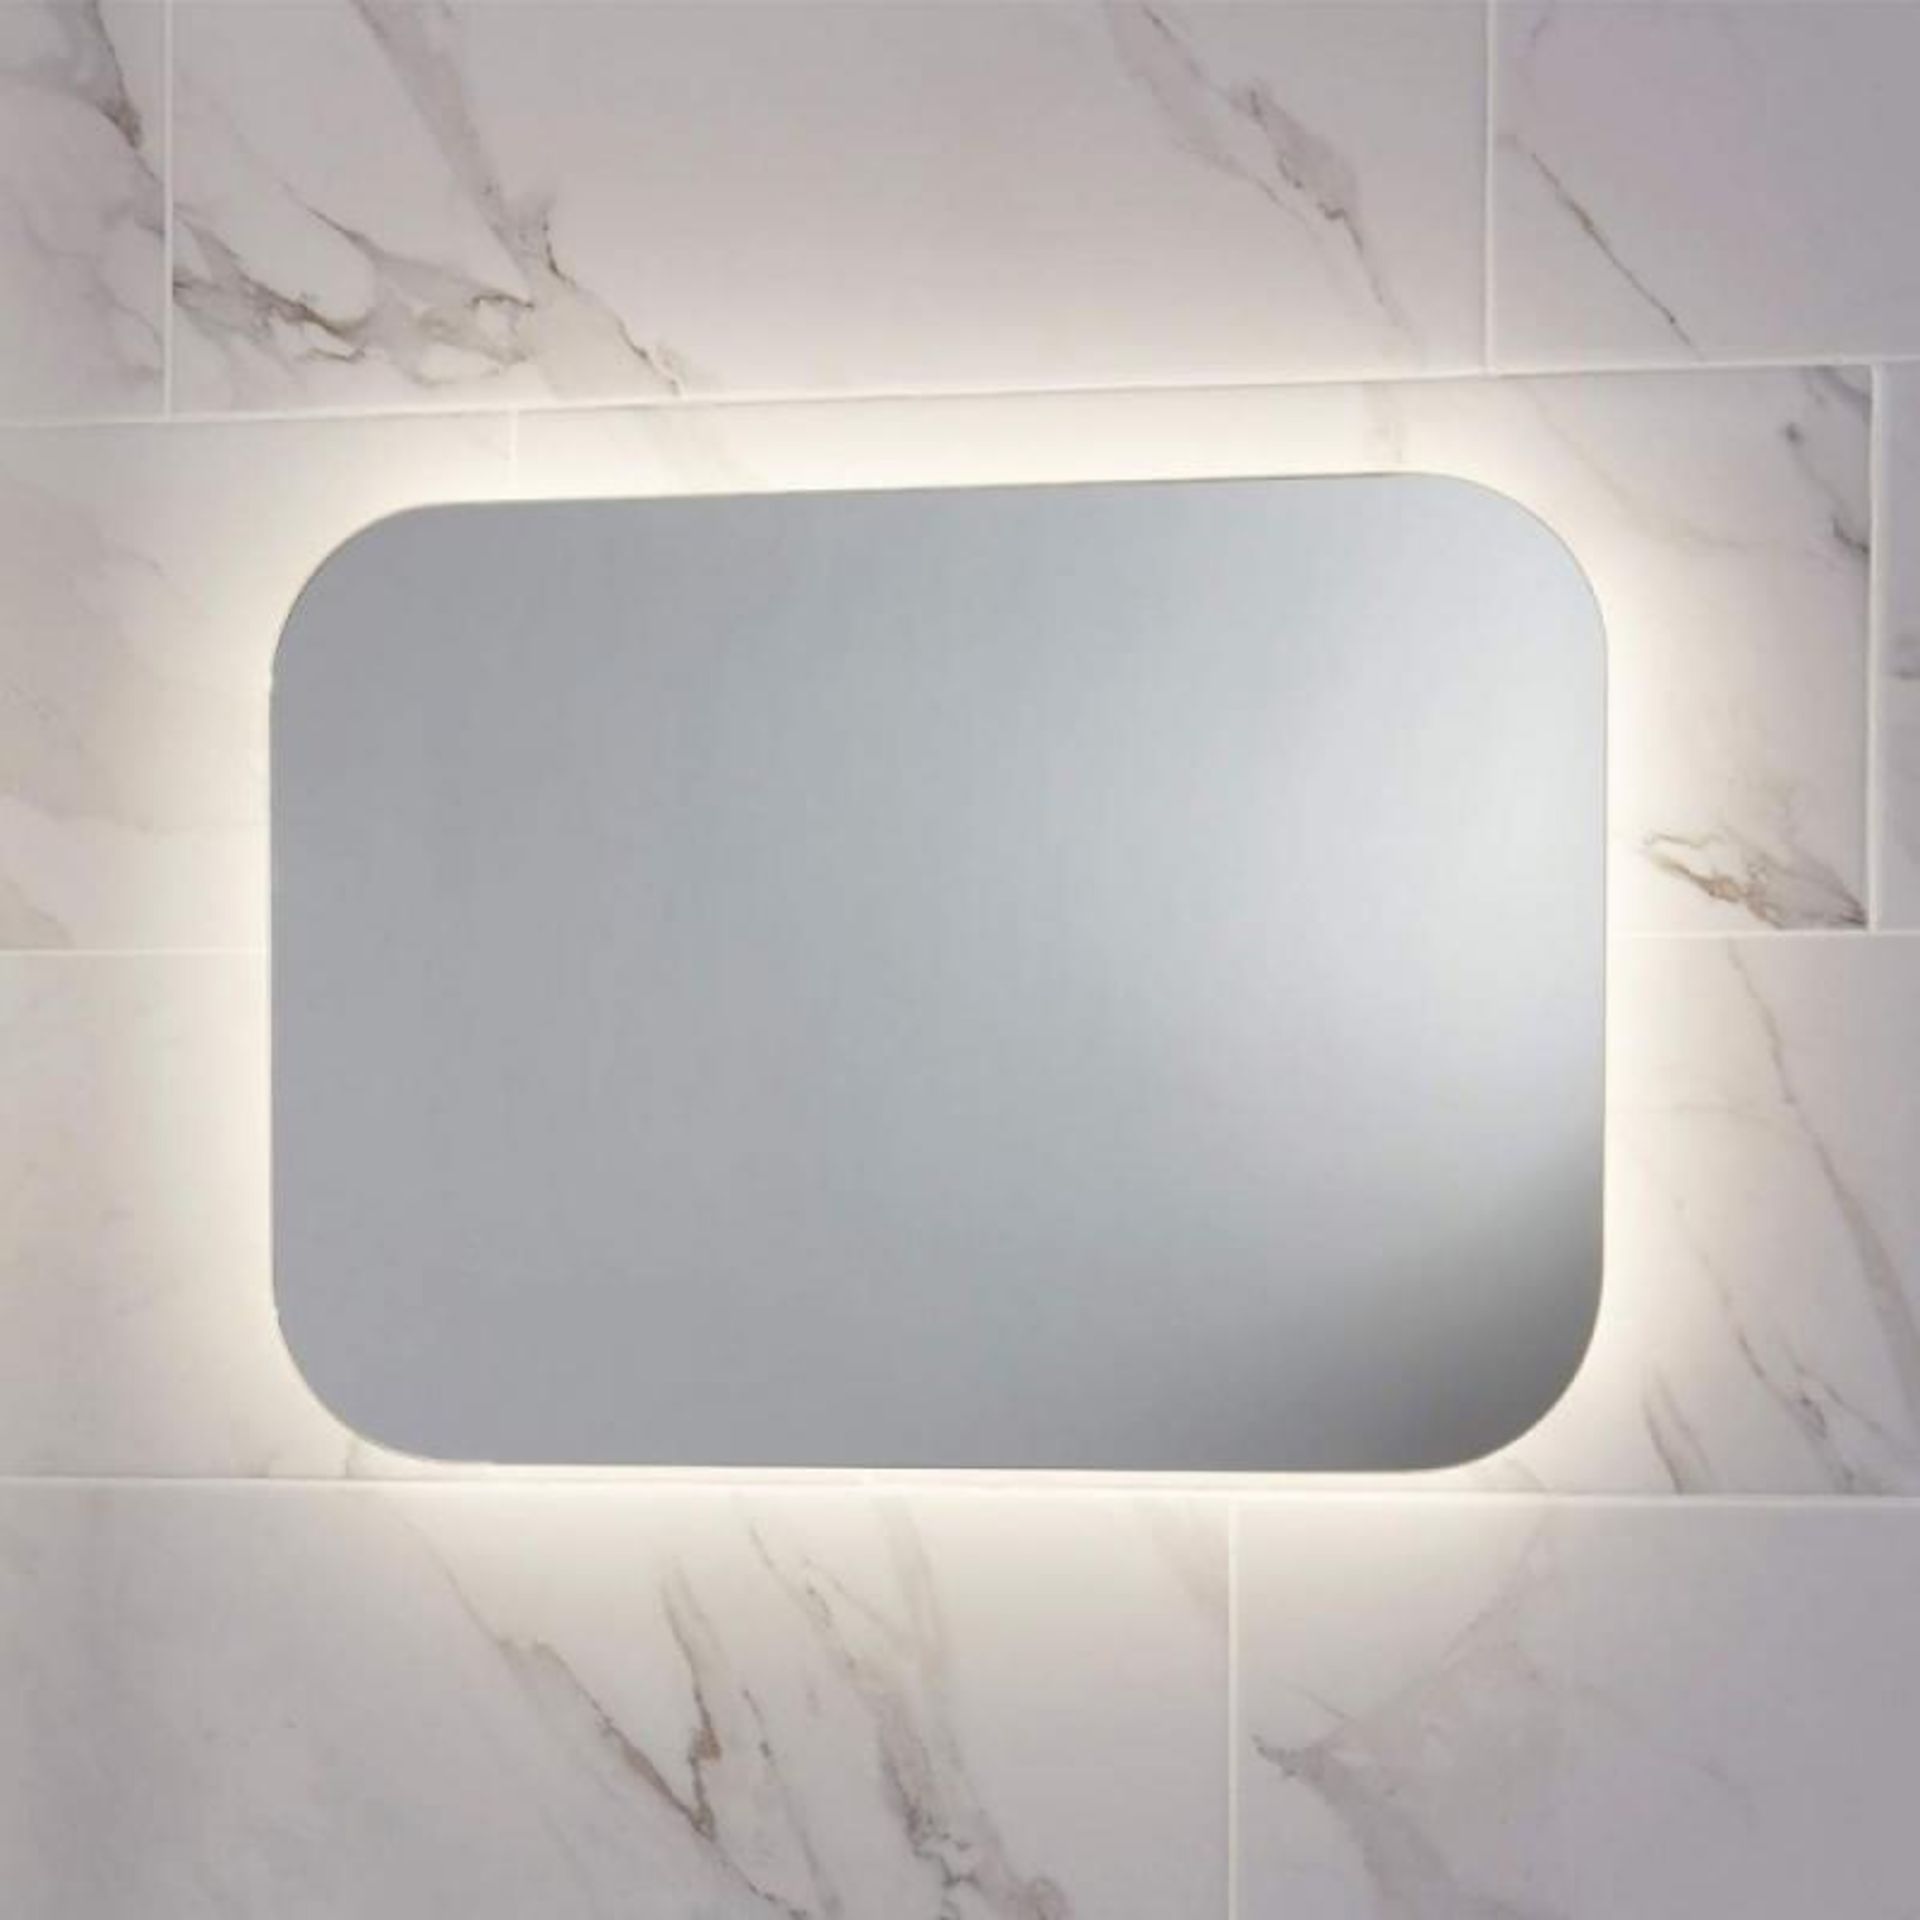 1 xScudo Aura 500 x 700mm LED Mirror with Demister Pad - New & Boxed Stock - Ref: AURAMIRROR - CL40 - Image 2 of 2